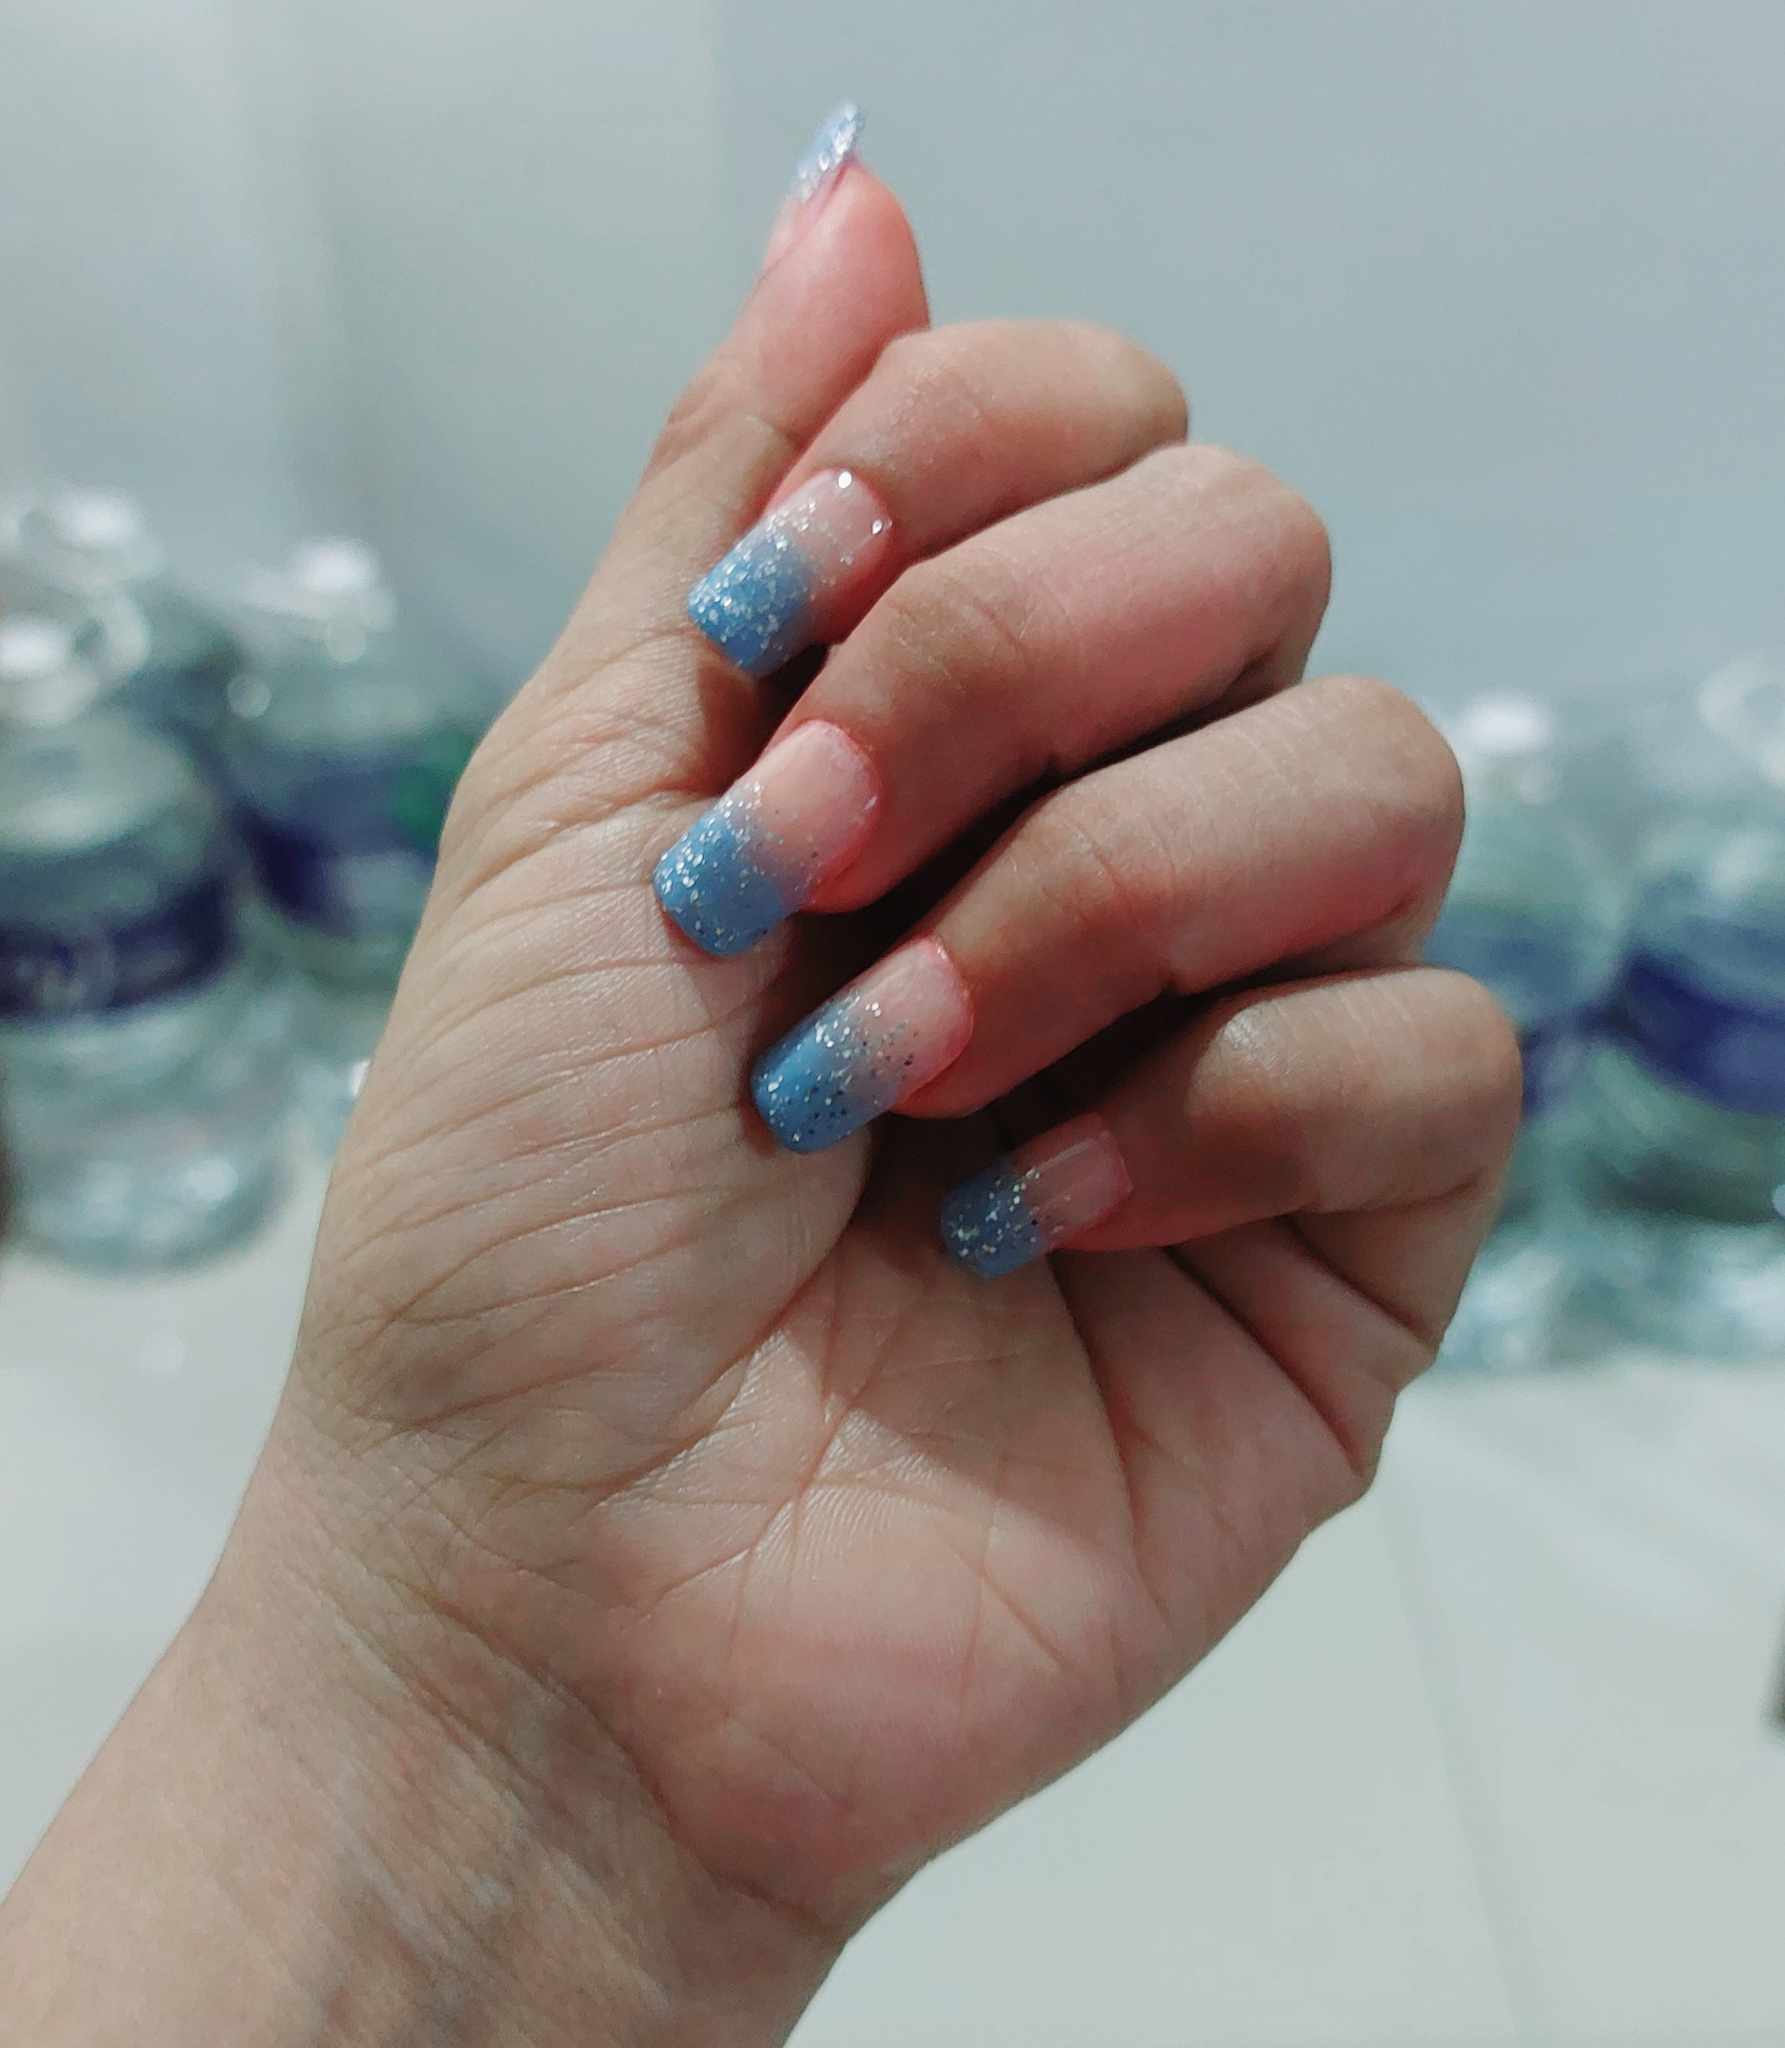 Ladies, how do you do things with long nails? - Sar Writes